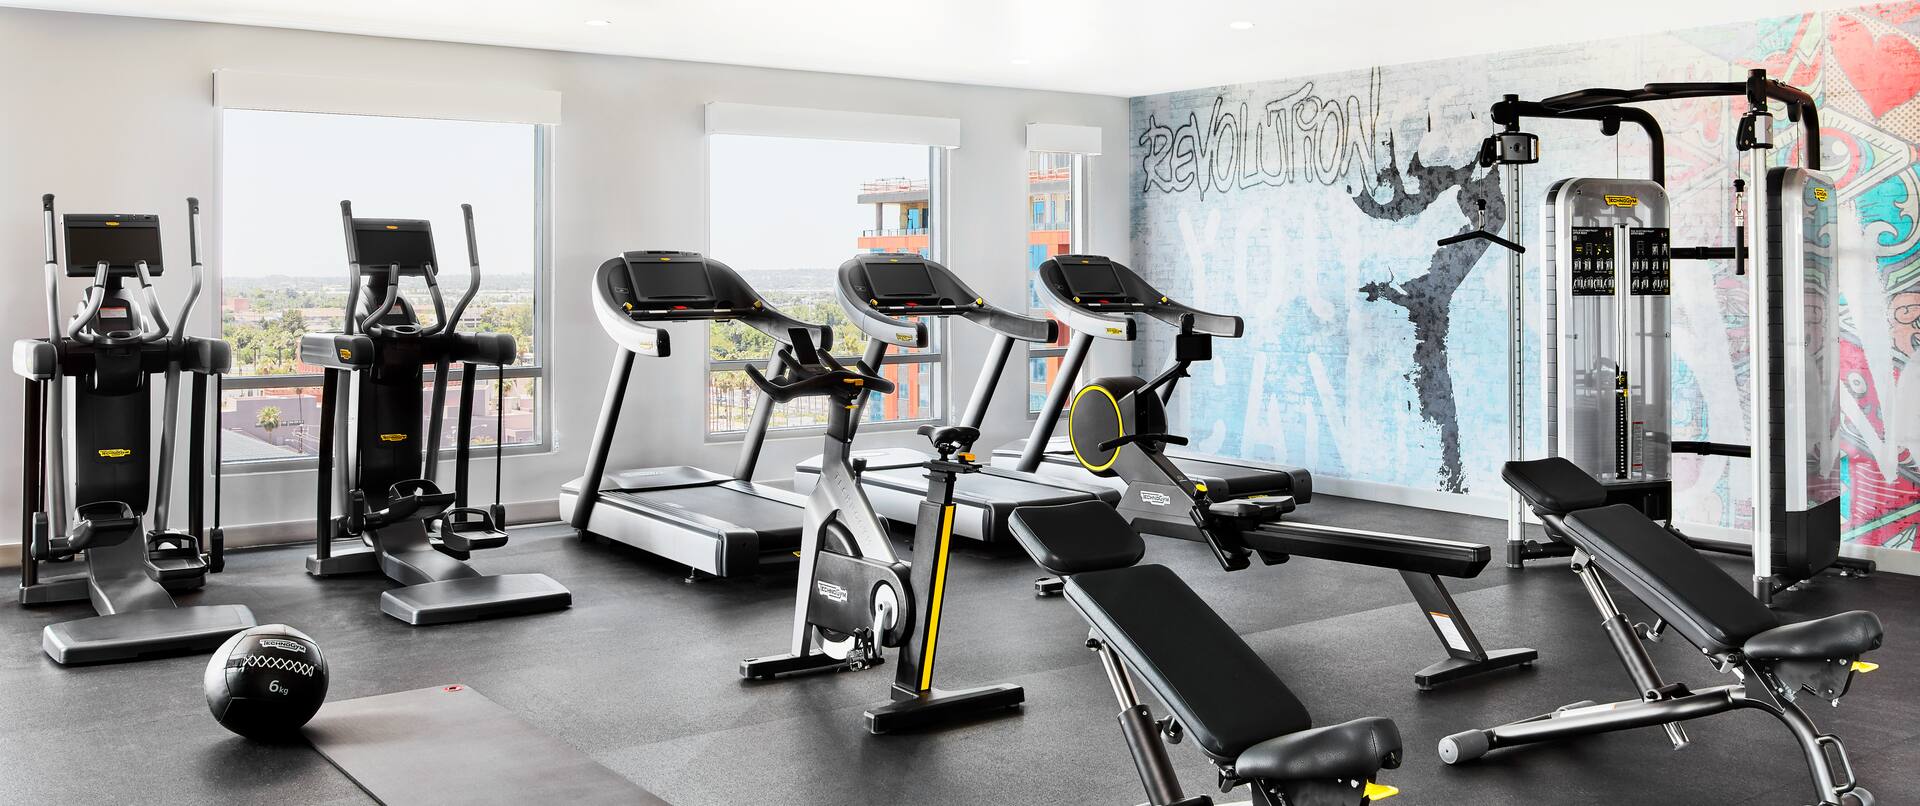 Fitness center with cardio machines and benches